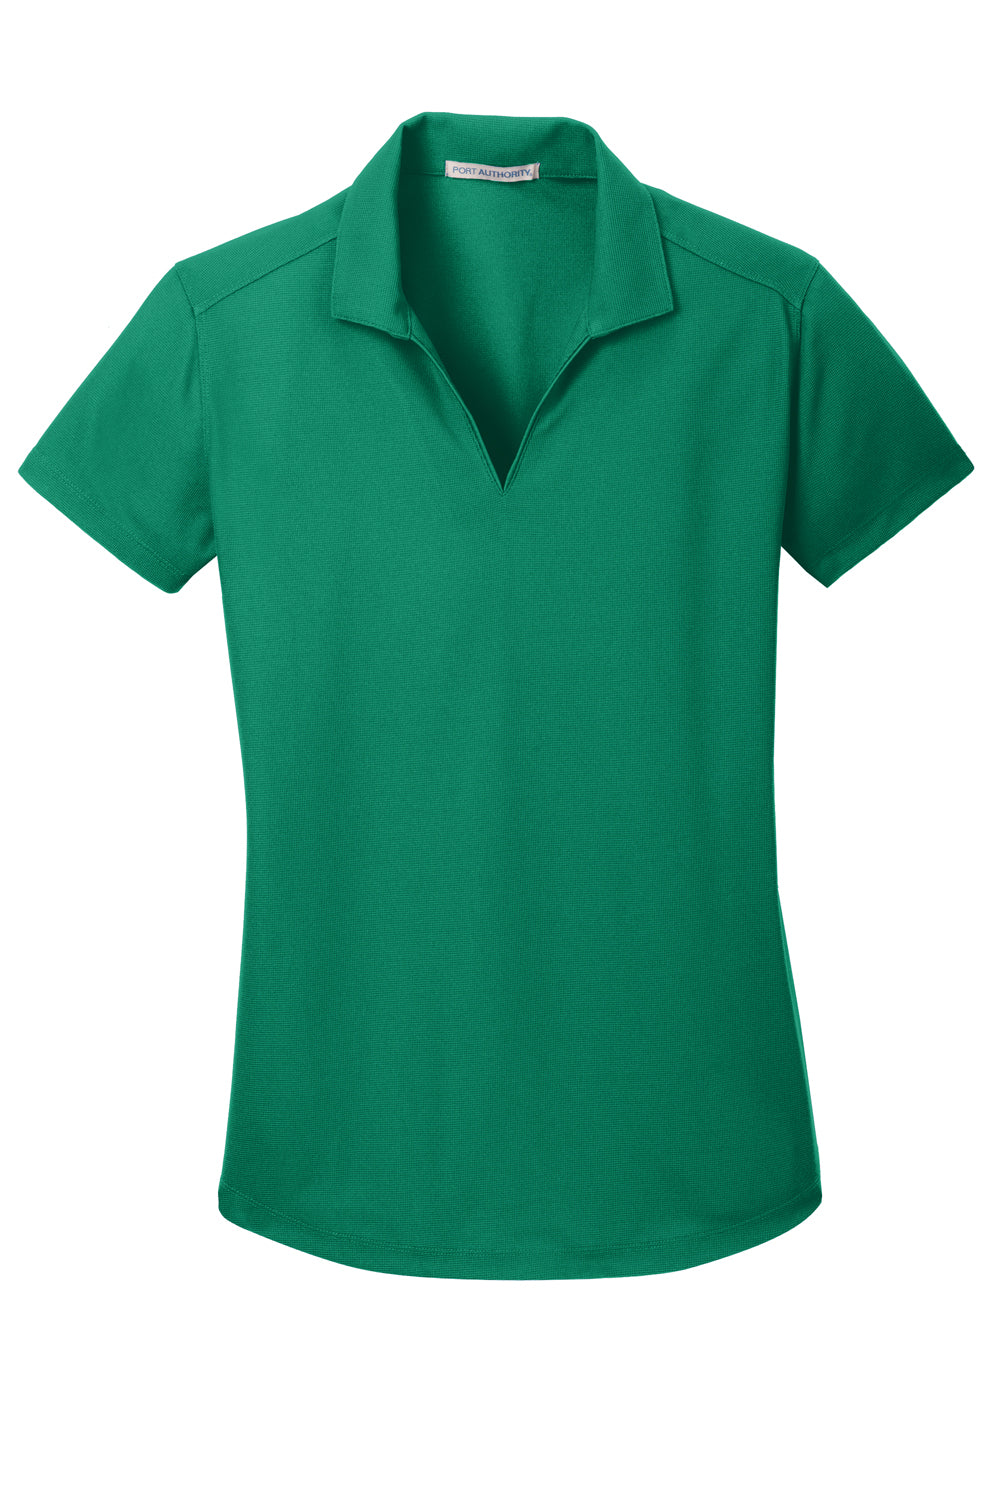 Port Authority L572 Womens Dry Zone Moisture Wicking Short Sleeve Polo Shirt Jewel Green Flat Front